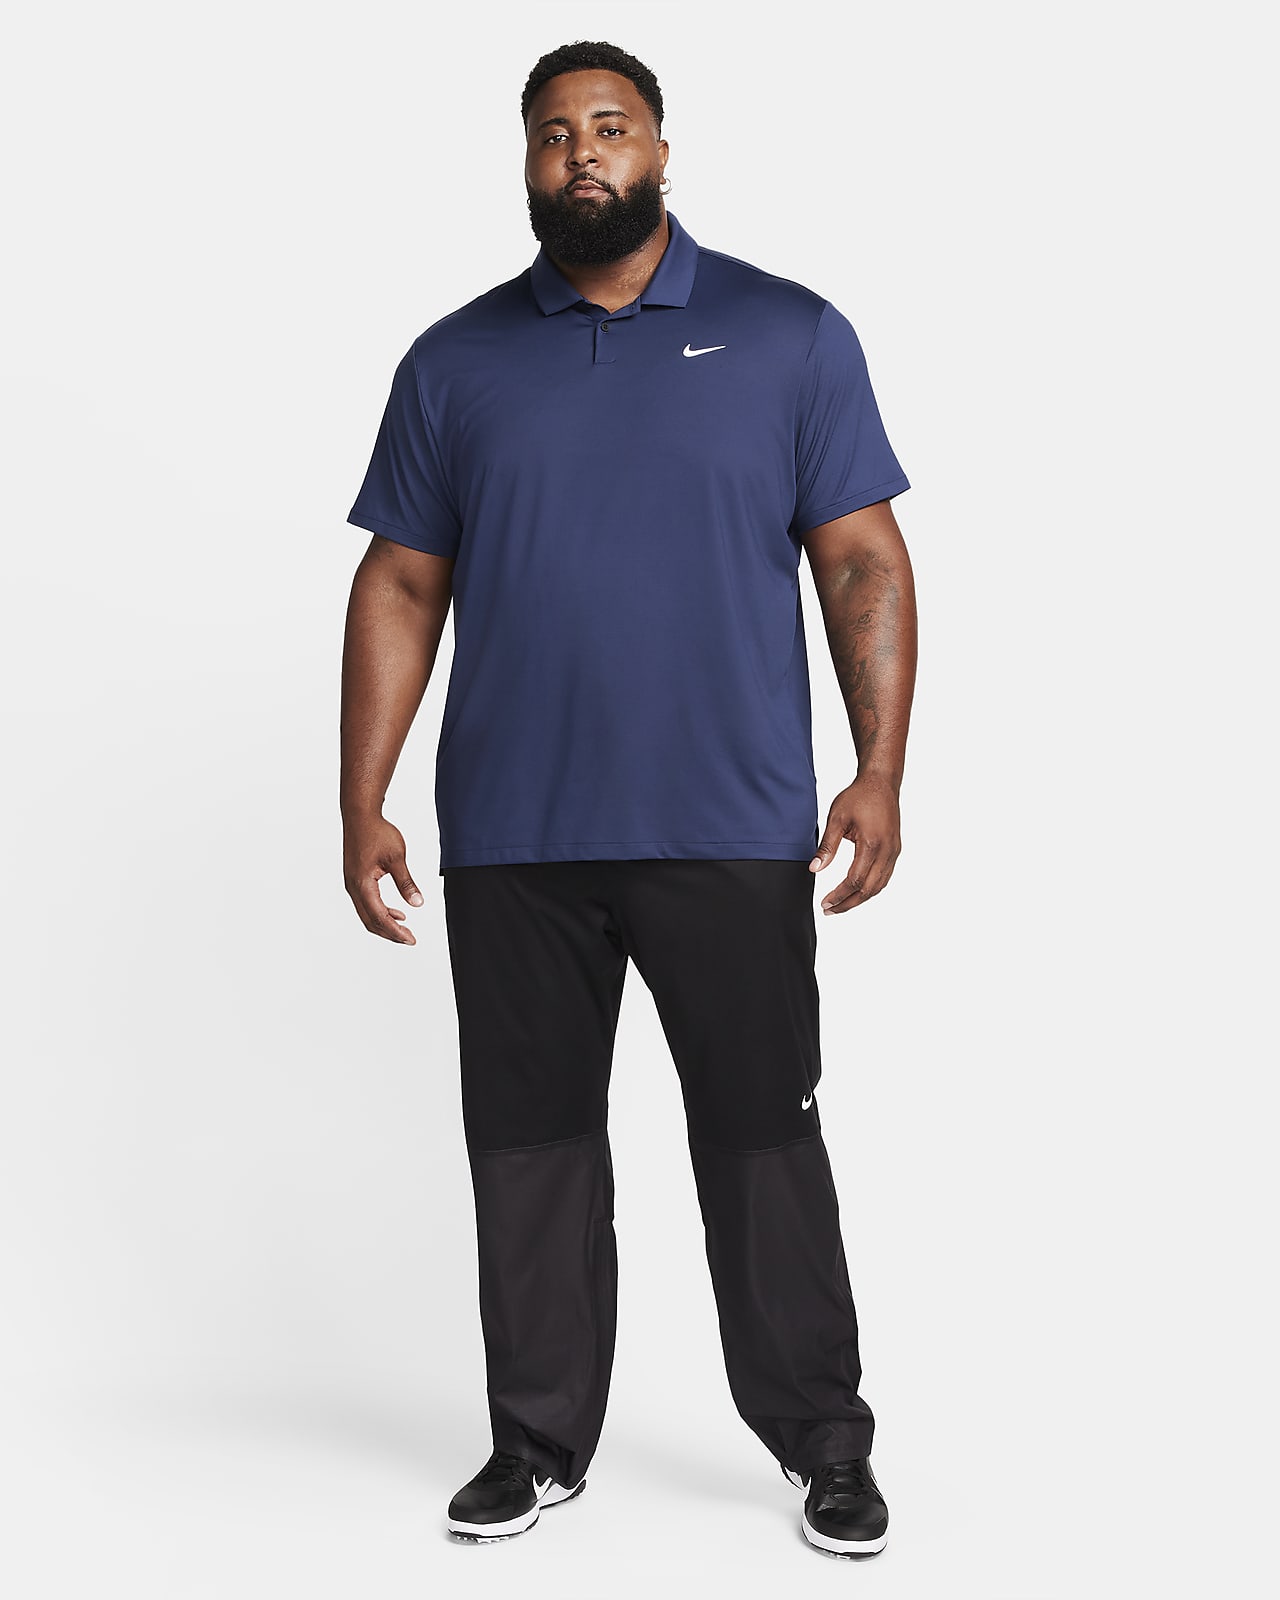 https://static.nike.com/a/images/t_PDP_1280_v1/f_auto,q_auto:eco/a628de30-b1e6-47a5-9b63-dd7e77b1b074/dri-fit-tour-solid-golf-polo-3n3bxz.png